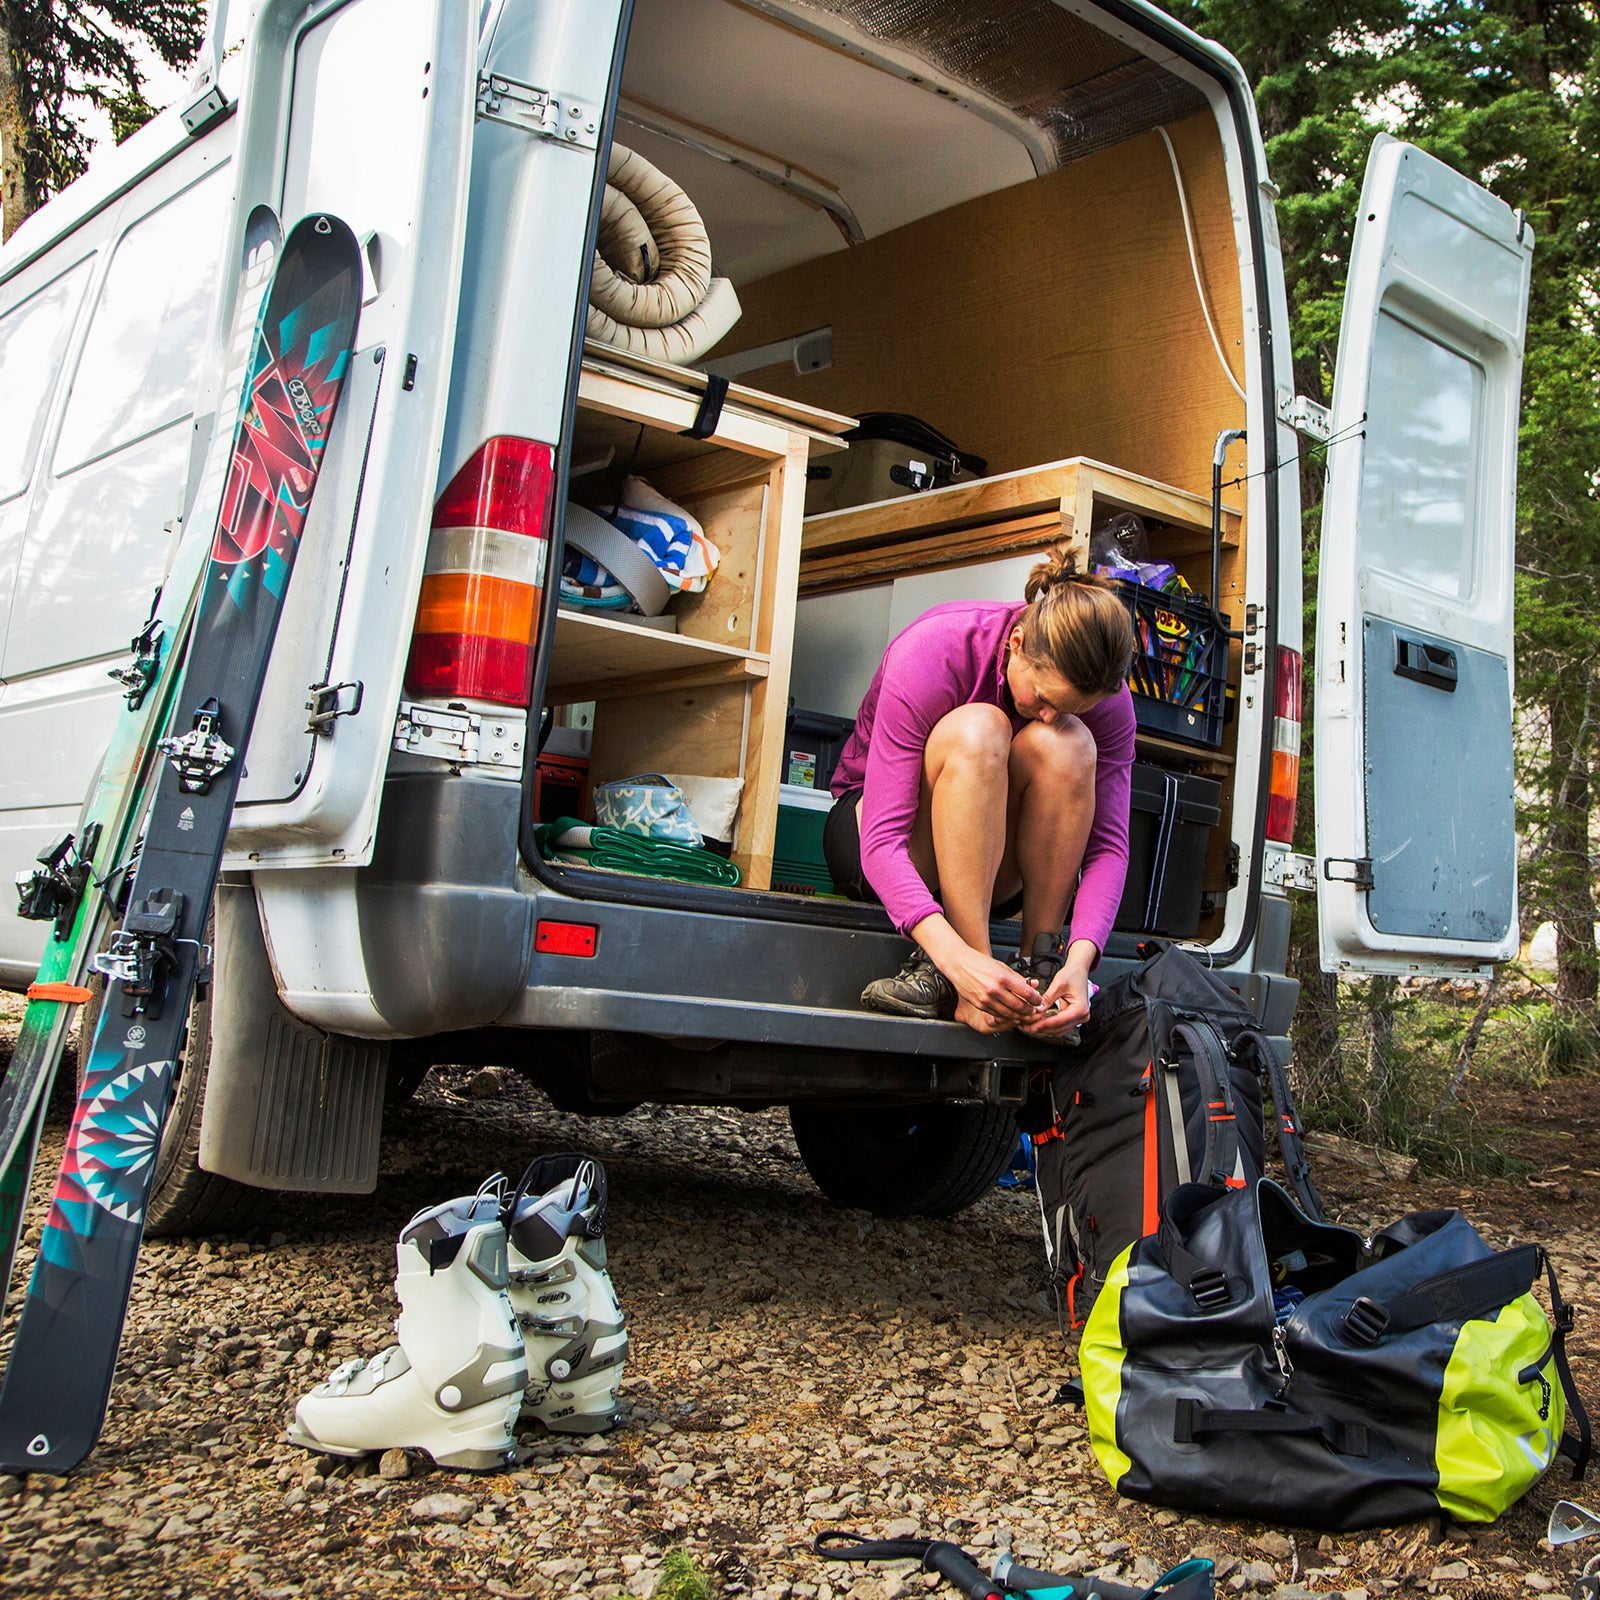 I Lived the #VanLife. It Wasn't Pretty. - The New York Times